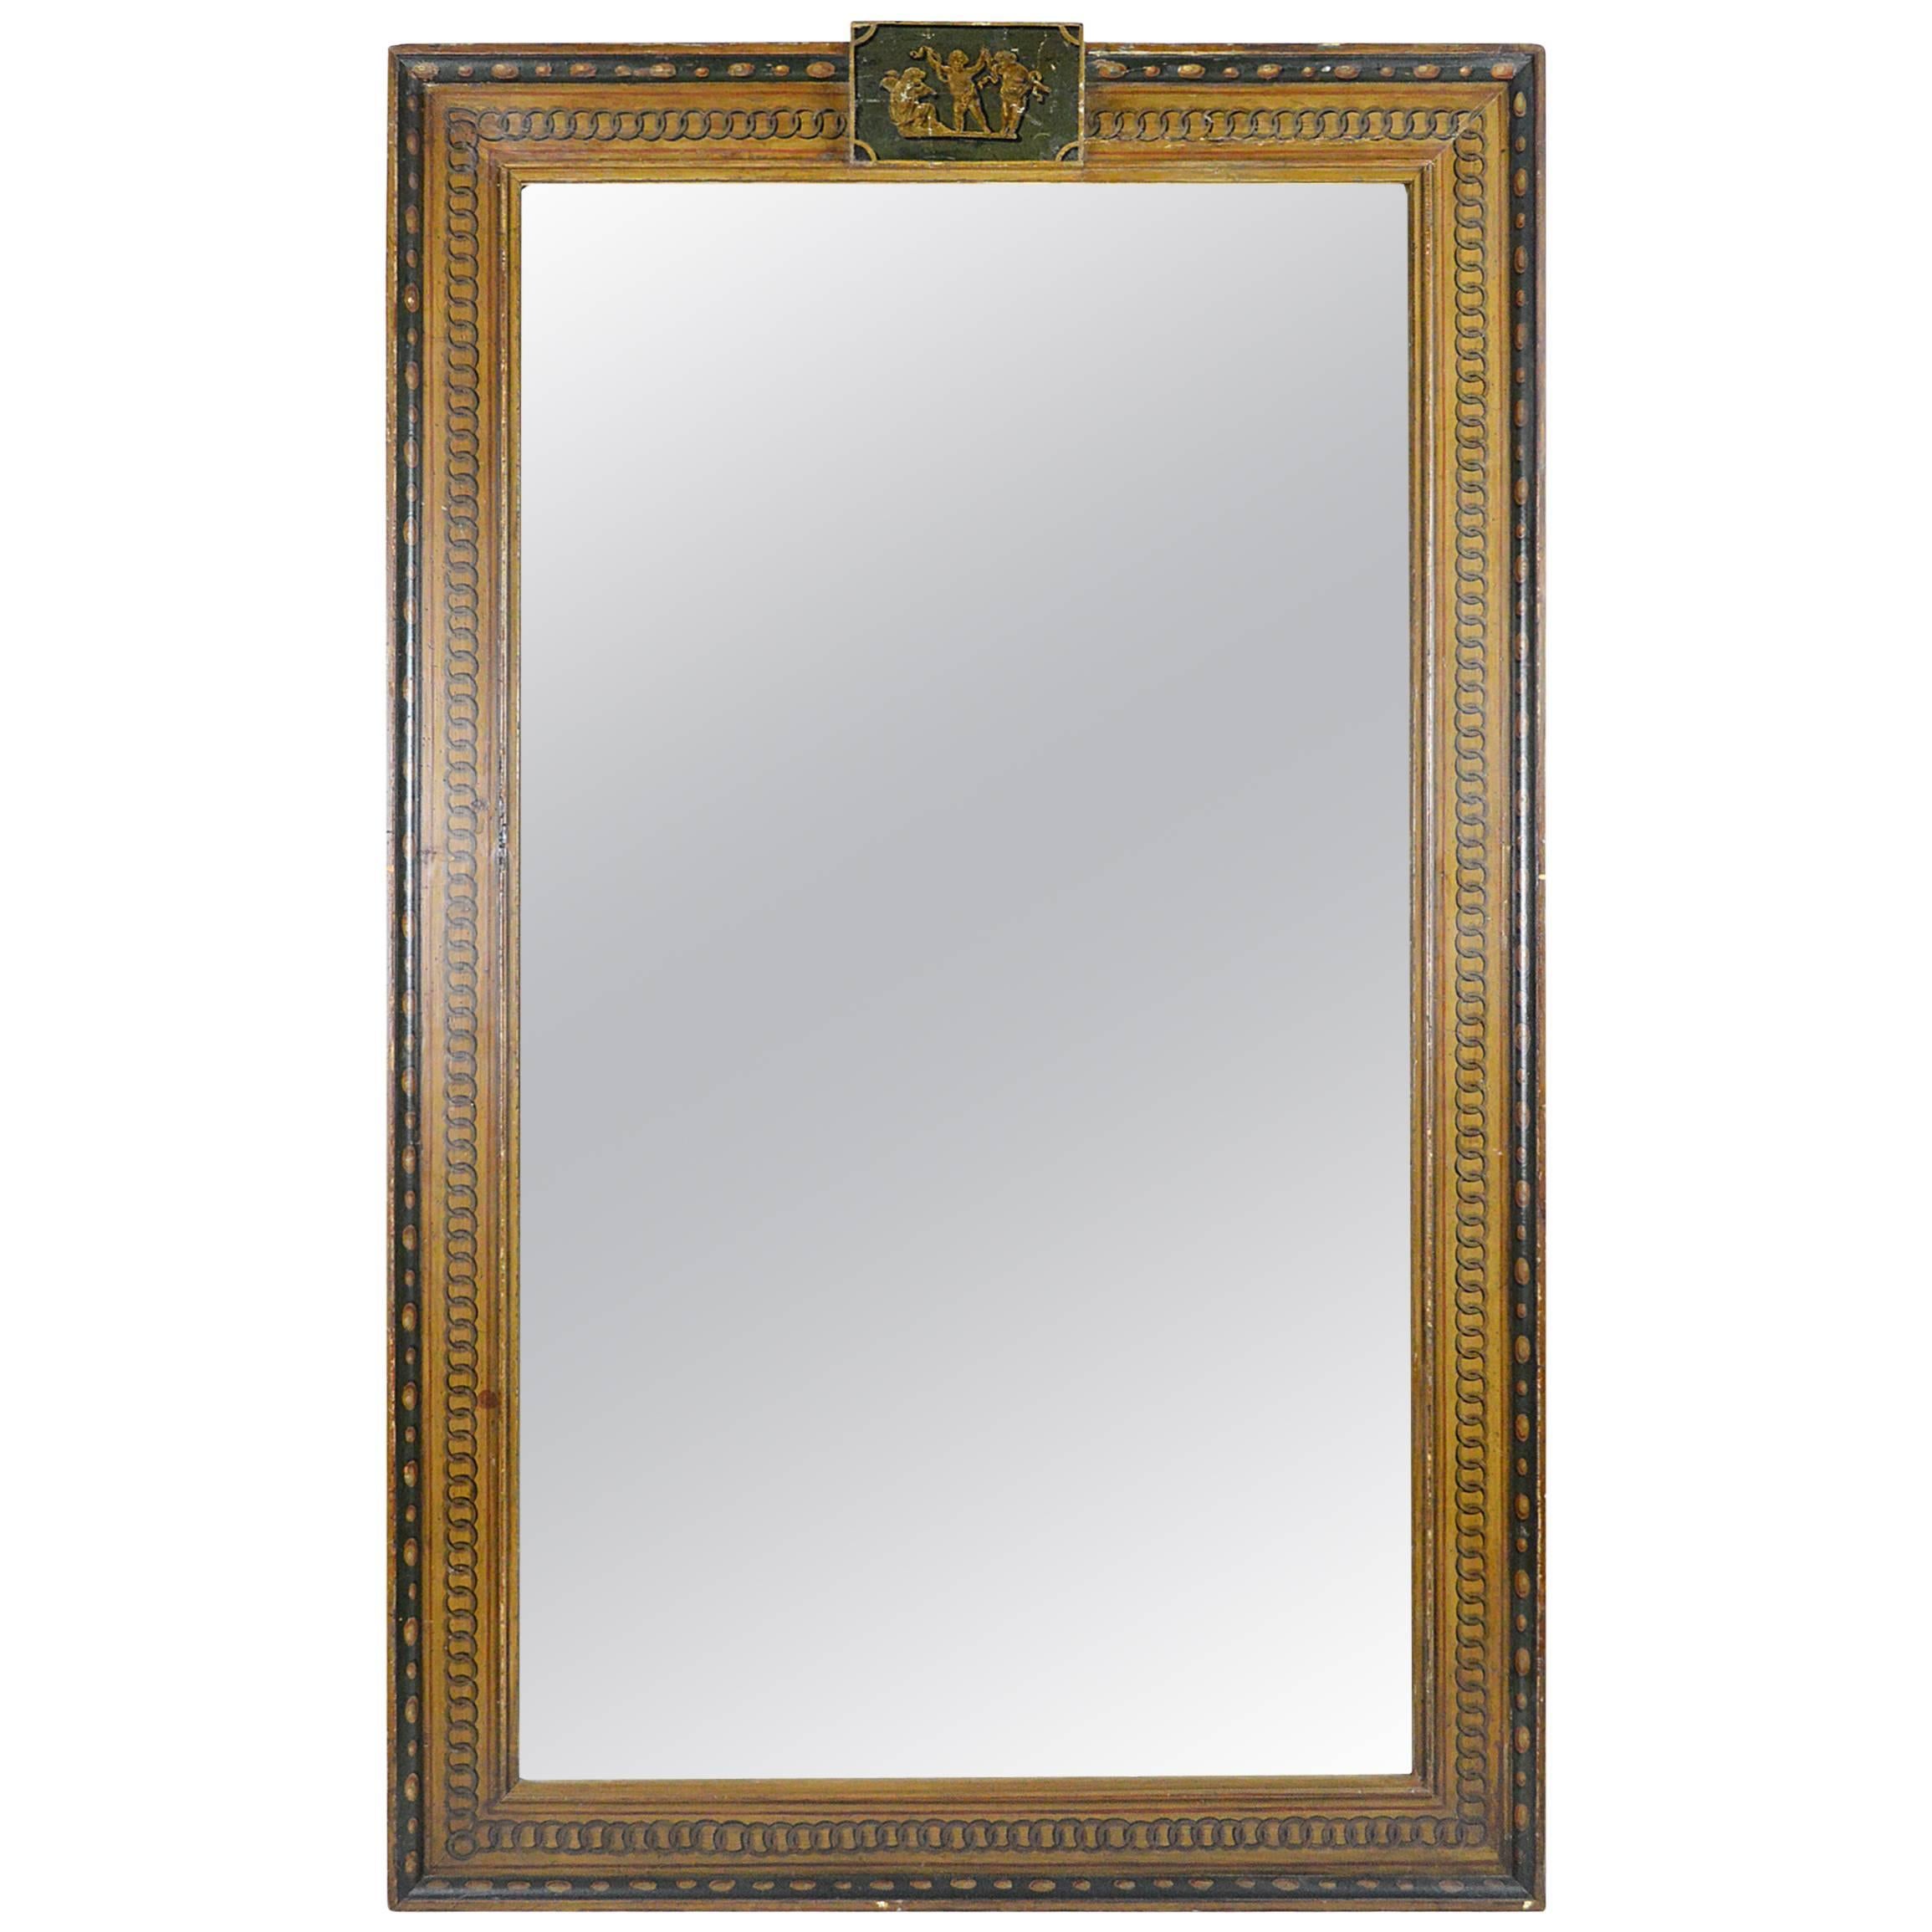 Large-Scale Italian Neoclassical Style Painted Mirror